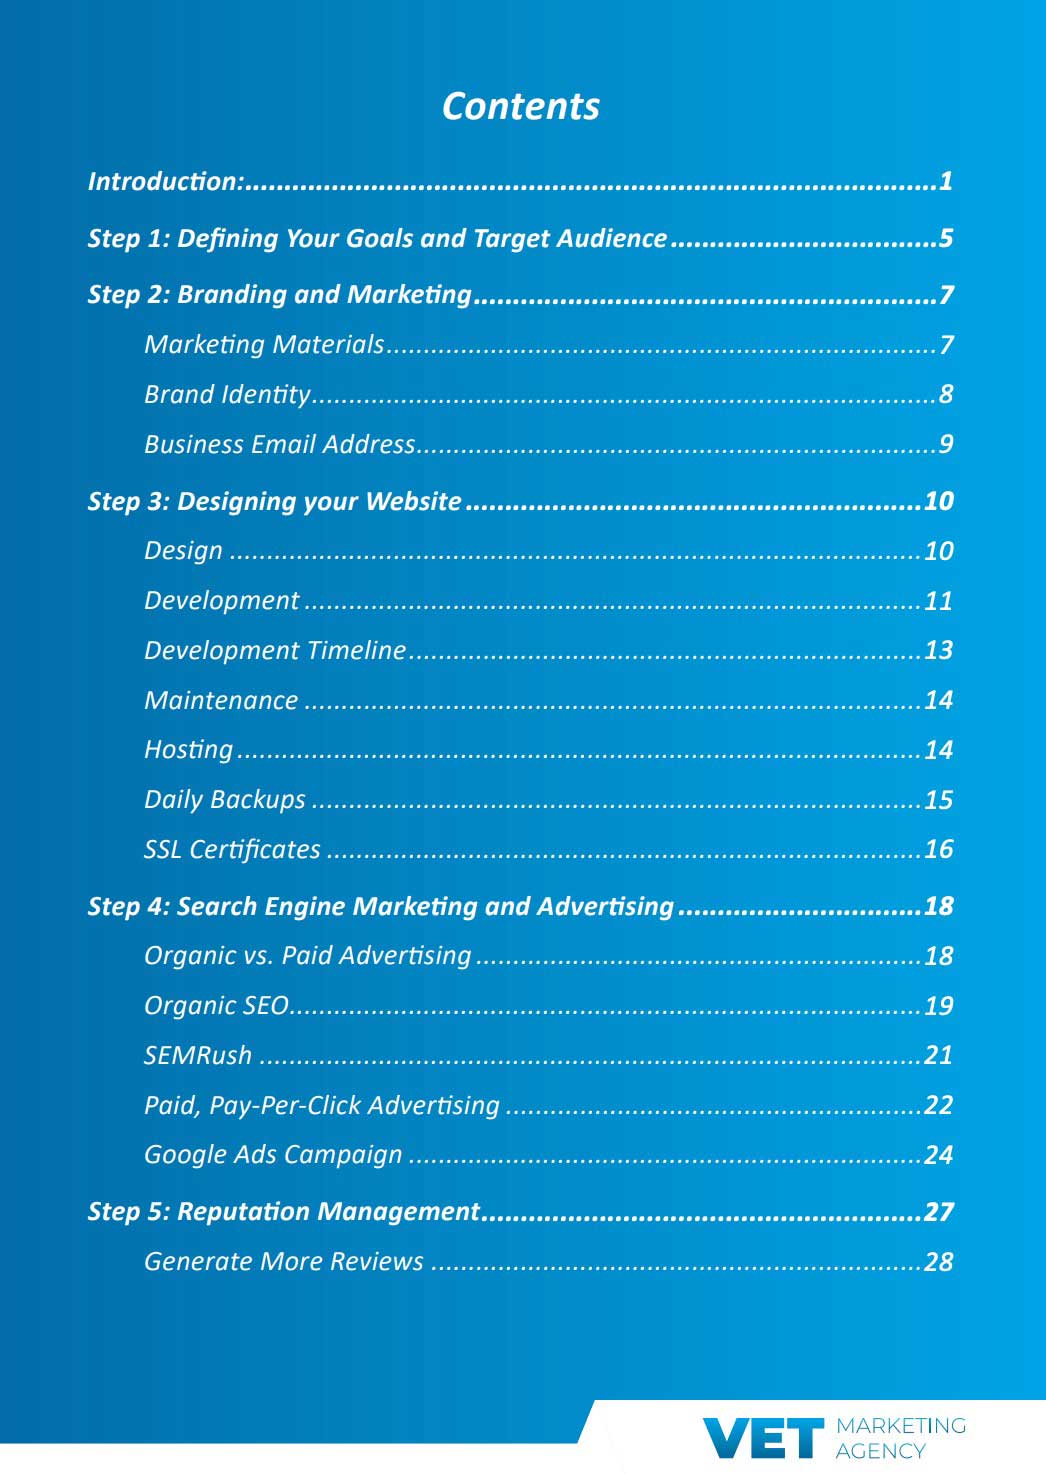 Vet Marketing eBook table of content